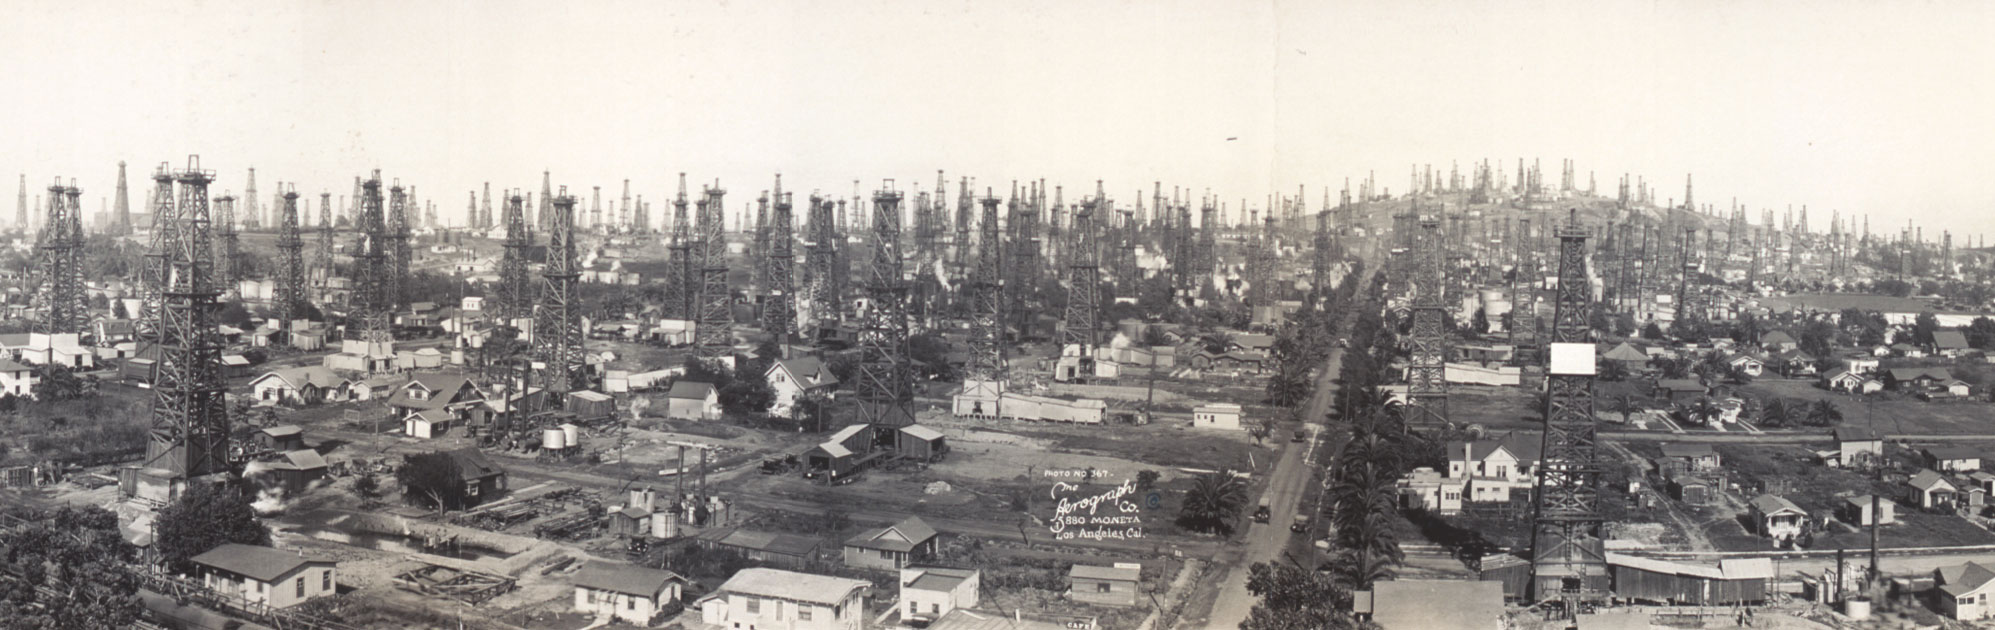 Black and white photograph showing the landscape of Signal Hill, Long Beach, California, ca. 1923. The photo shows numerous oil derricks scattered among buildings which appear to be residential homes.